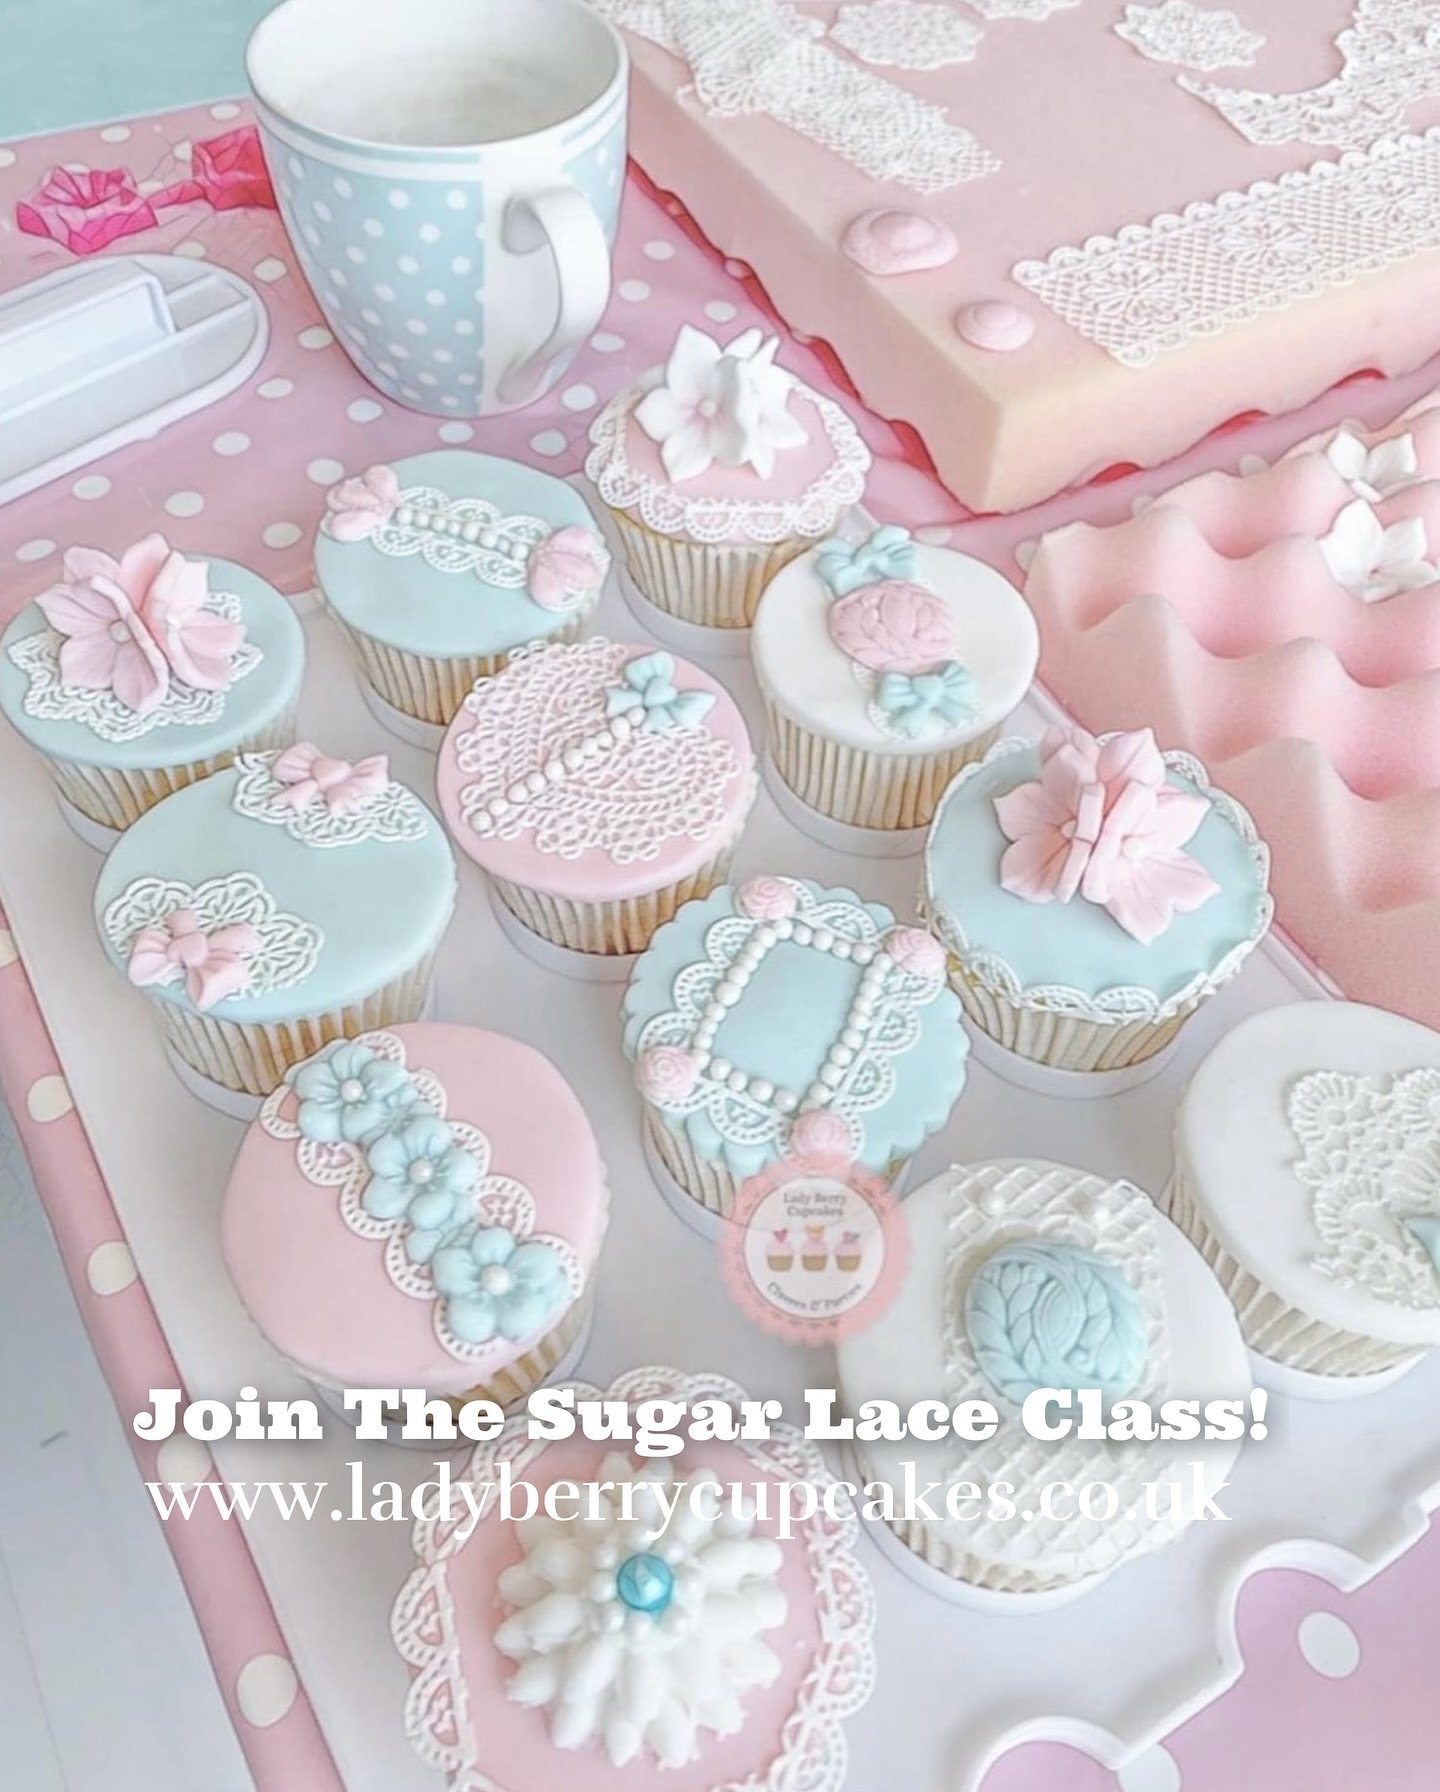 🧁 Would you like to learn to create these beautiful Sugar Lace cupcakes? Join the next Sugar Lace Class! 

🩷 Book your spot at www.ladyberrycupcakes.co.uk 

#SugarLace #SugarLaceClass #SugarLaceCupcakes #SugarLaceCakes #PrettyCakes #PartyCupcakes #